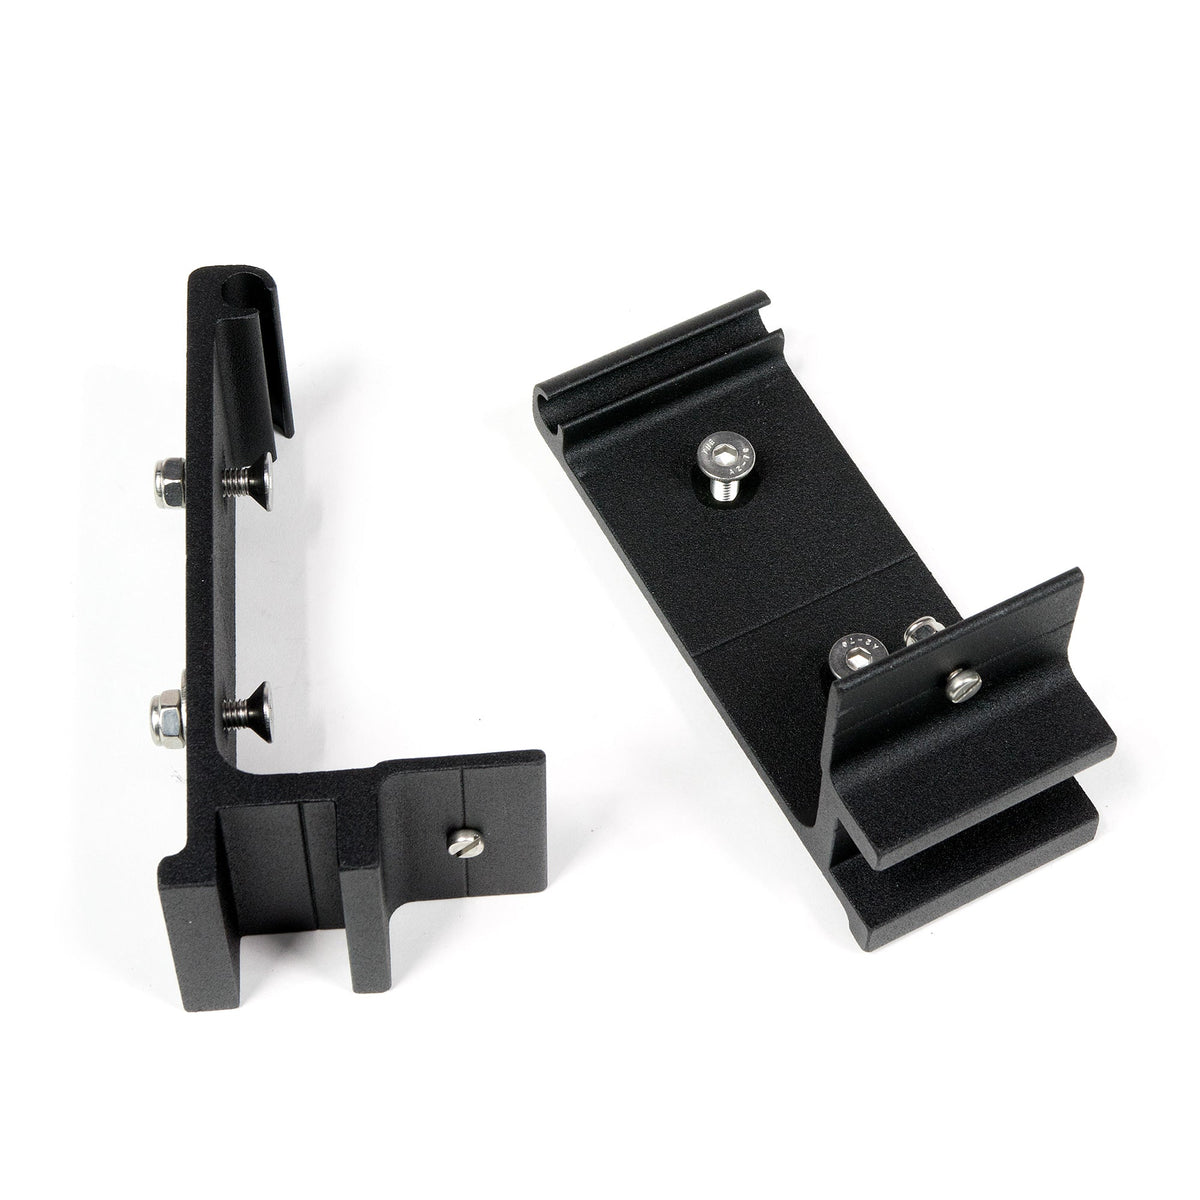 Series 1000/2000 Awning Mounts Series 1000/2000 Awning Mounts, Black Awning Accessories Eezi-Awn- Adventure Imports